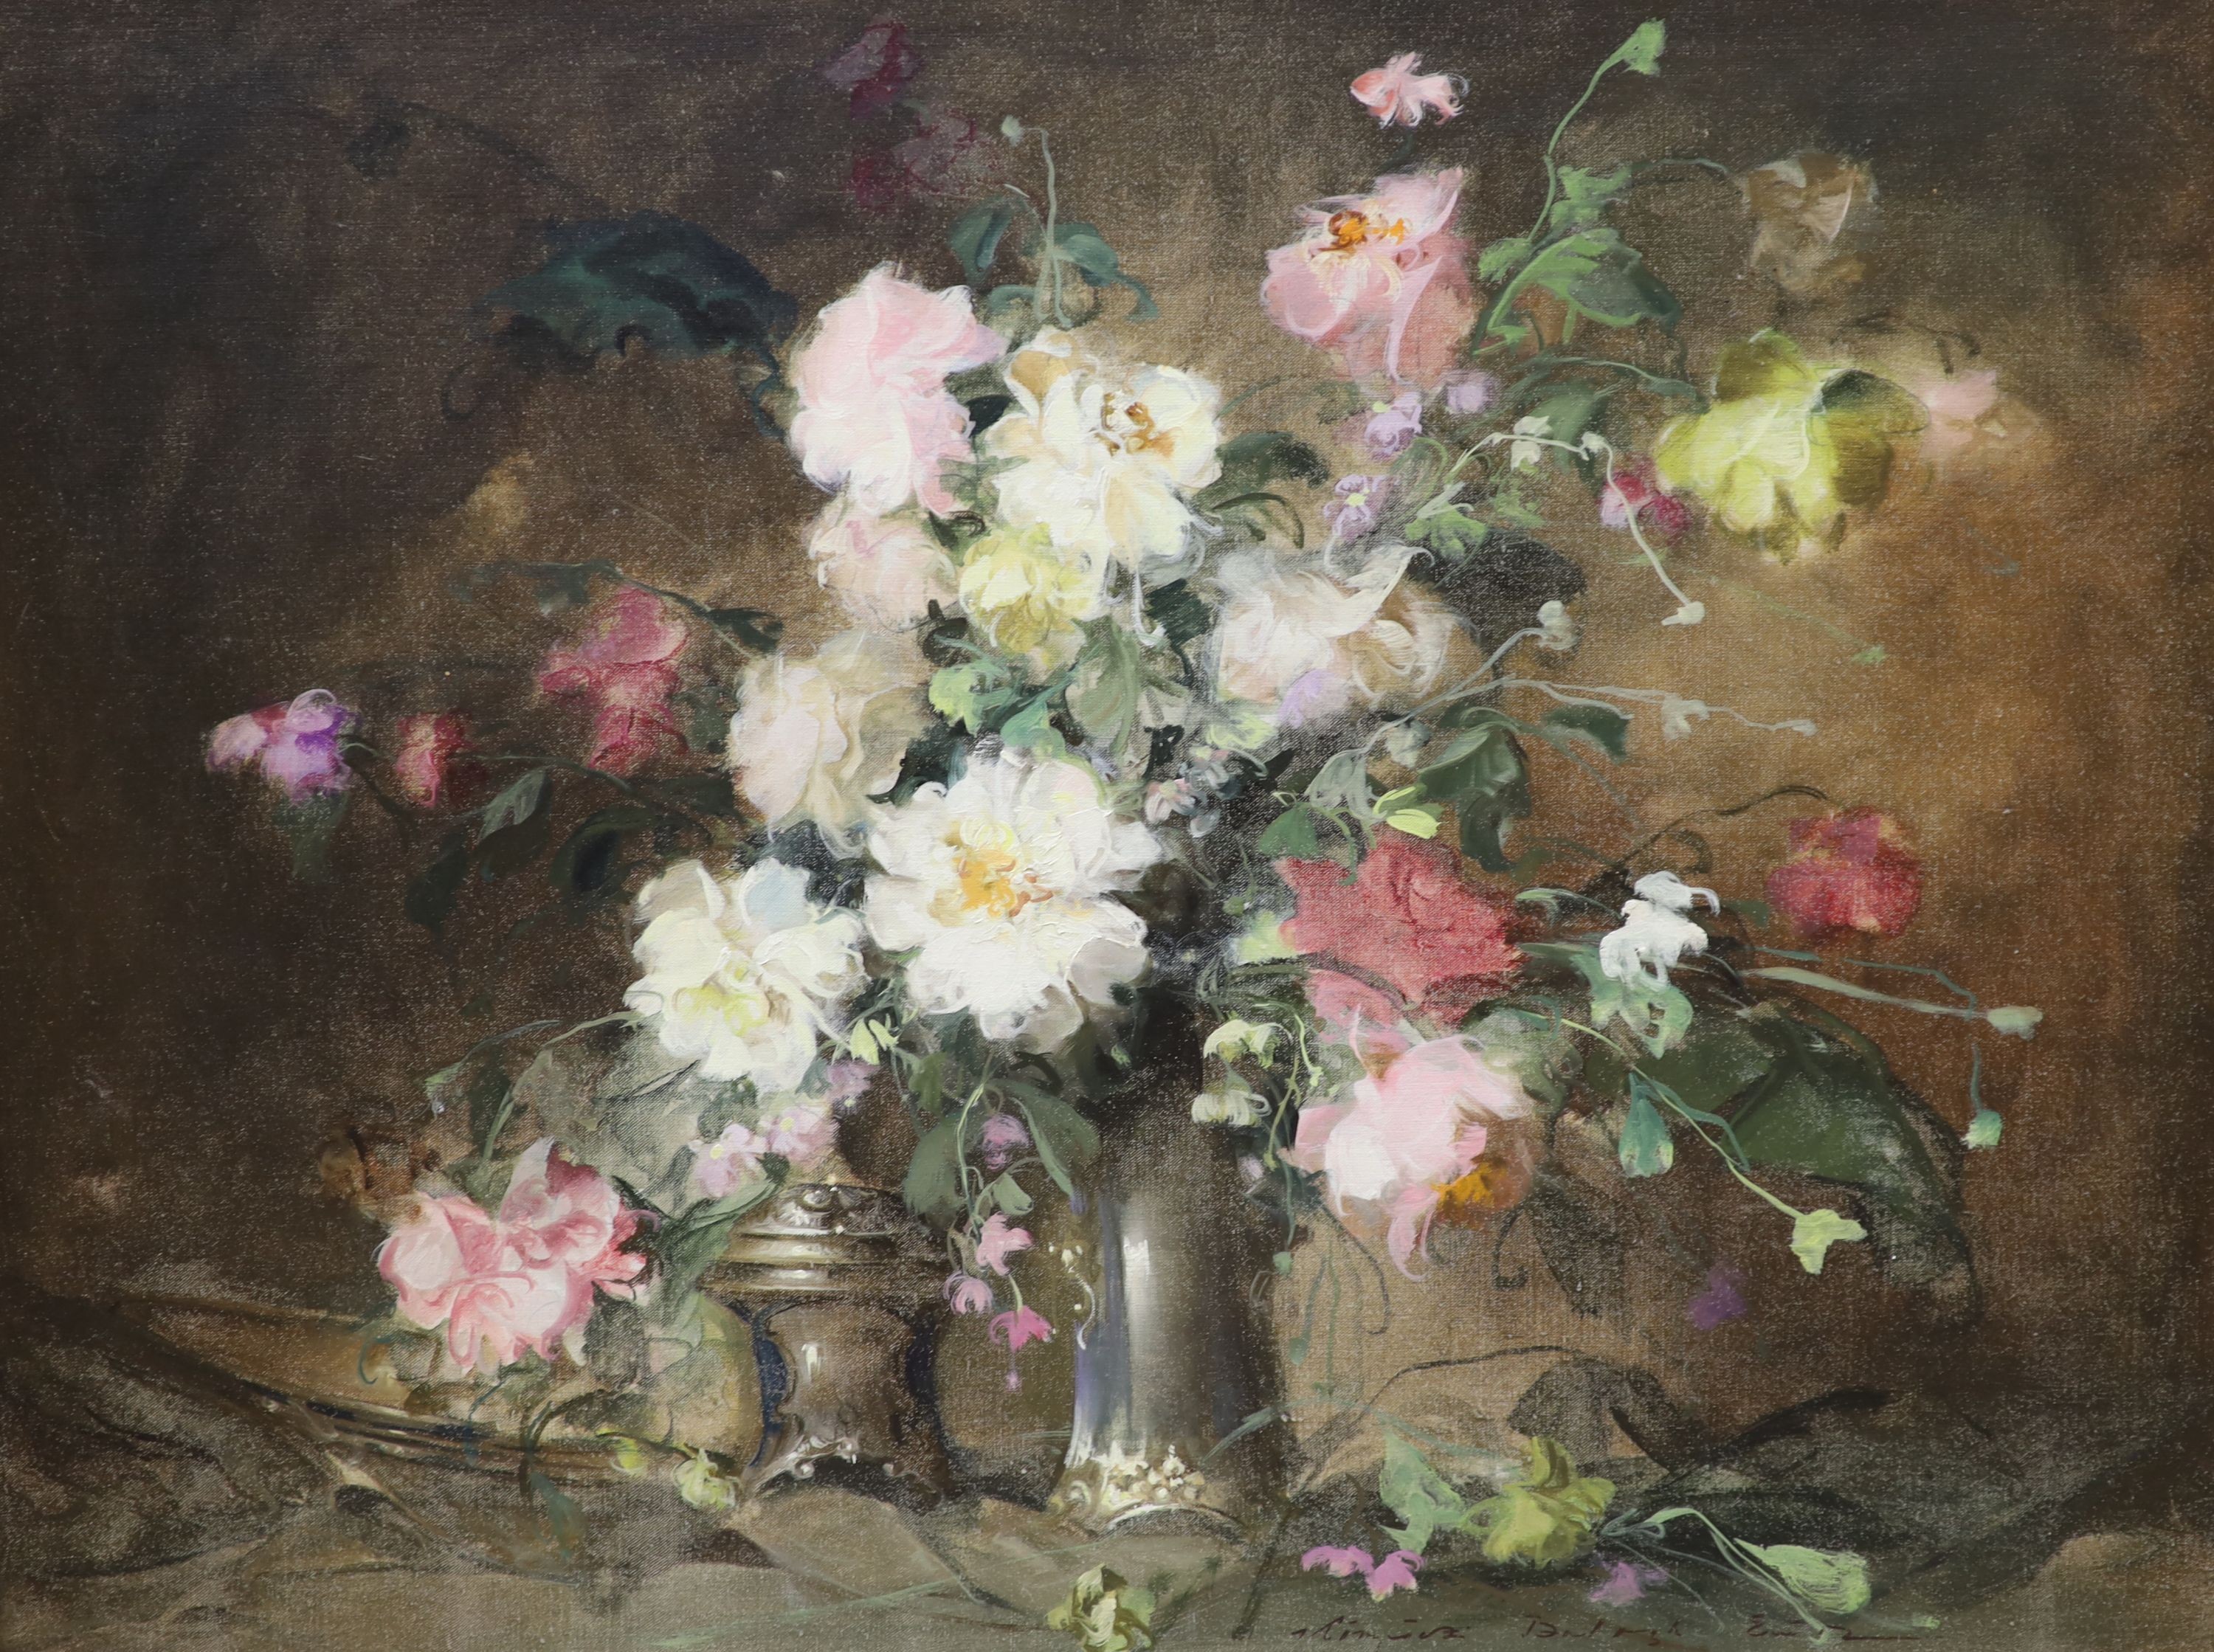 Endre Kompoczy Balogh (1911-1977), oil on canvas, Mixed blossoms, signed, with 1963 Stacey Marks label verso, 59 x 78cm